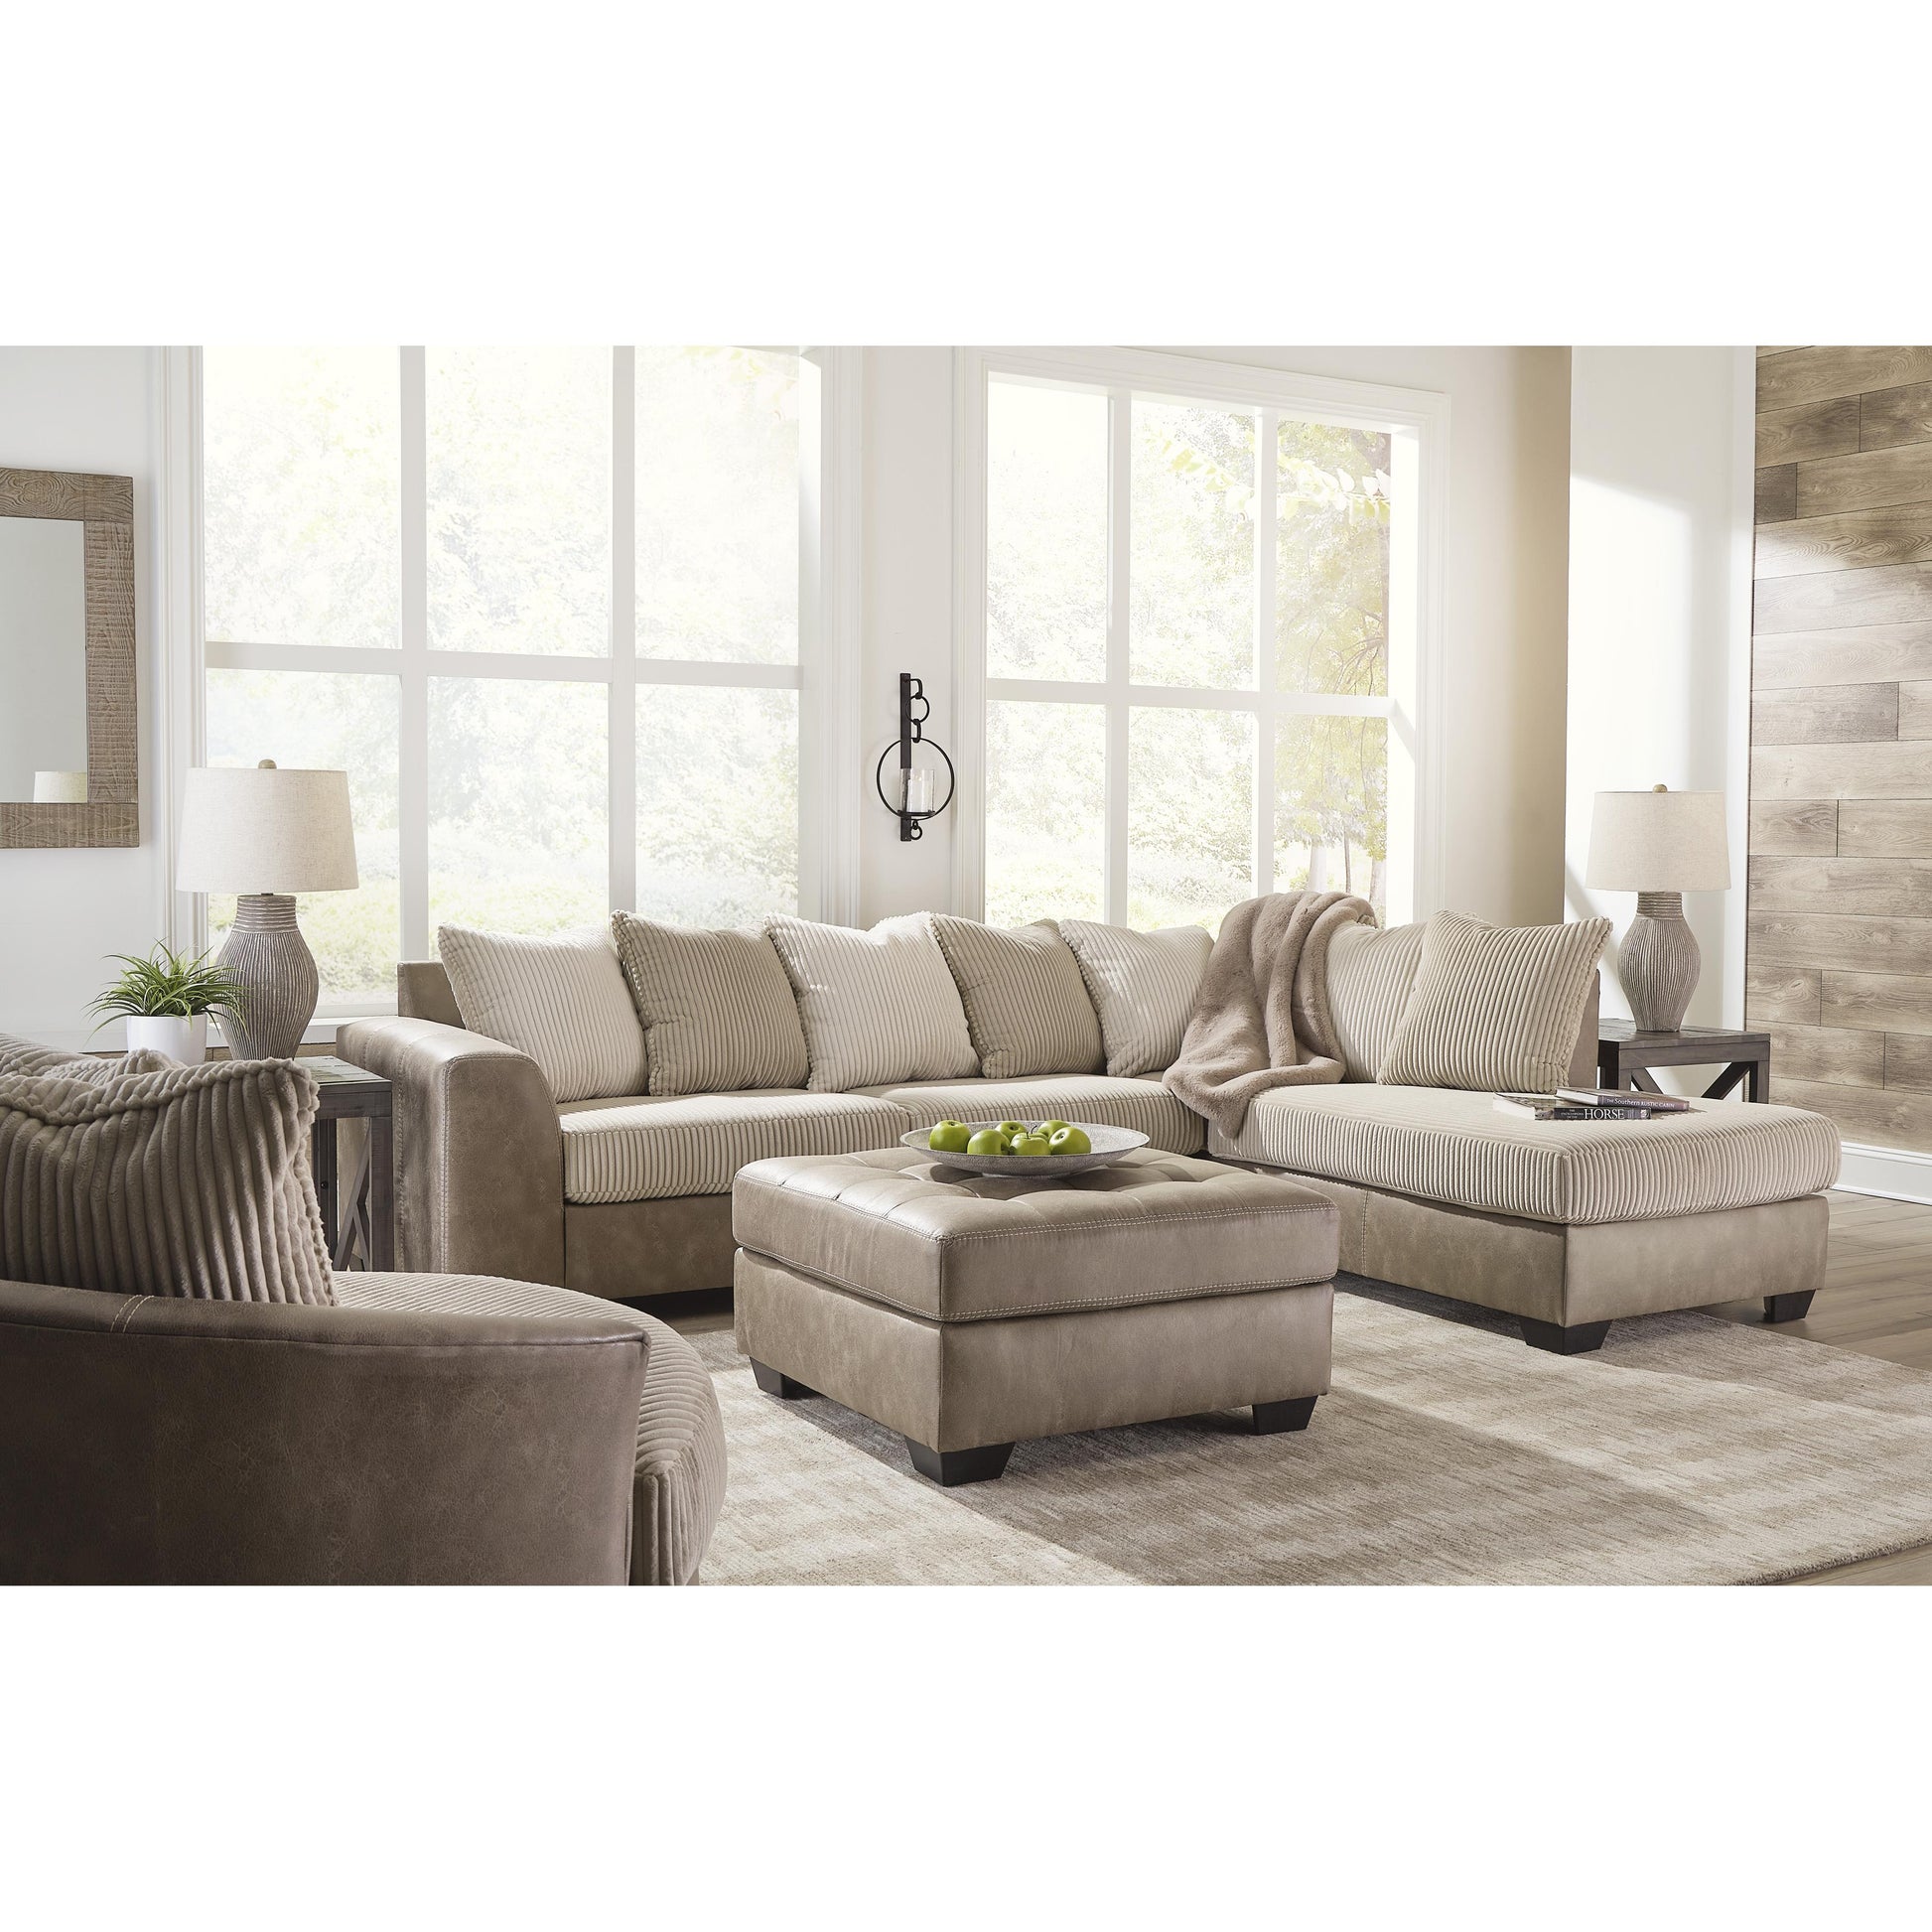 Signature Design by Ashley Keskin Fabric and Leather Look 2 pc Sectional 1840366/1840317 IMAGE 5